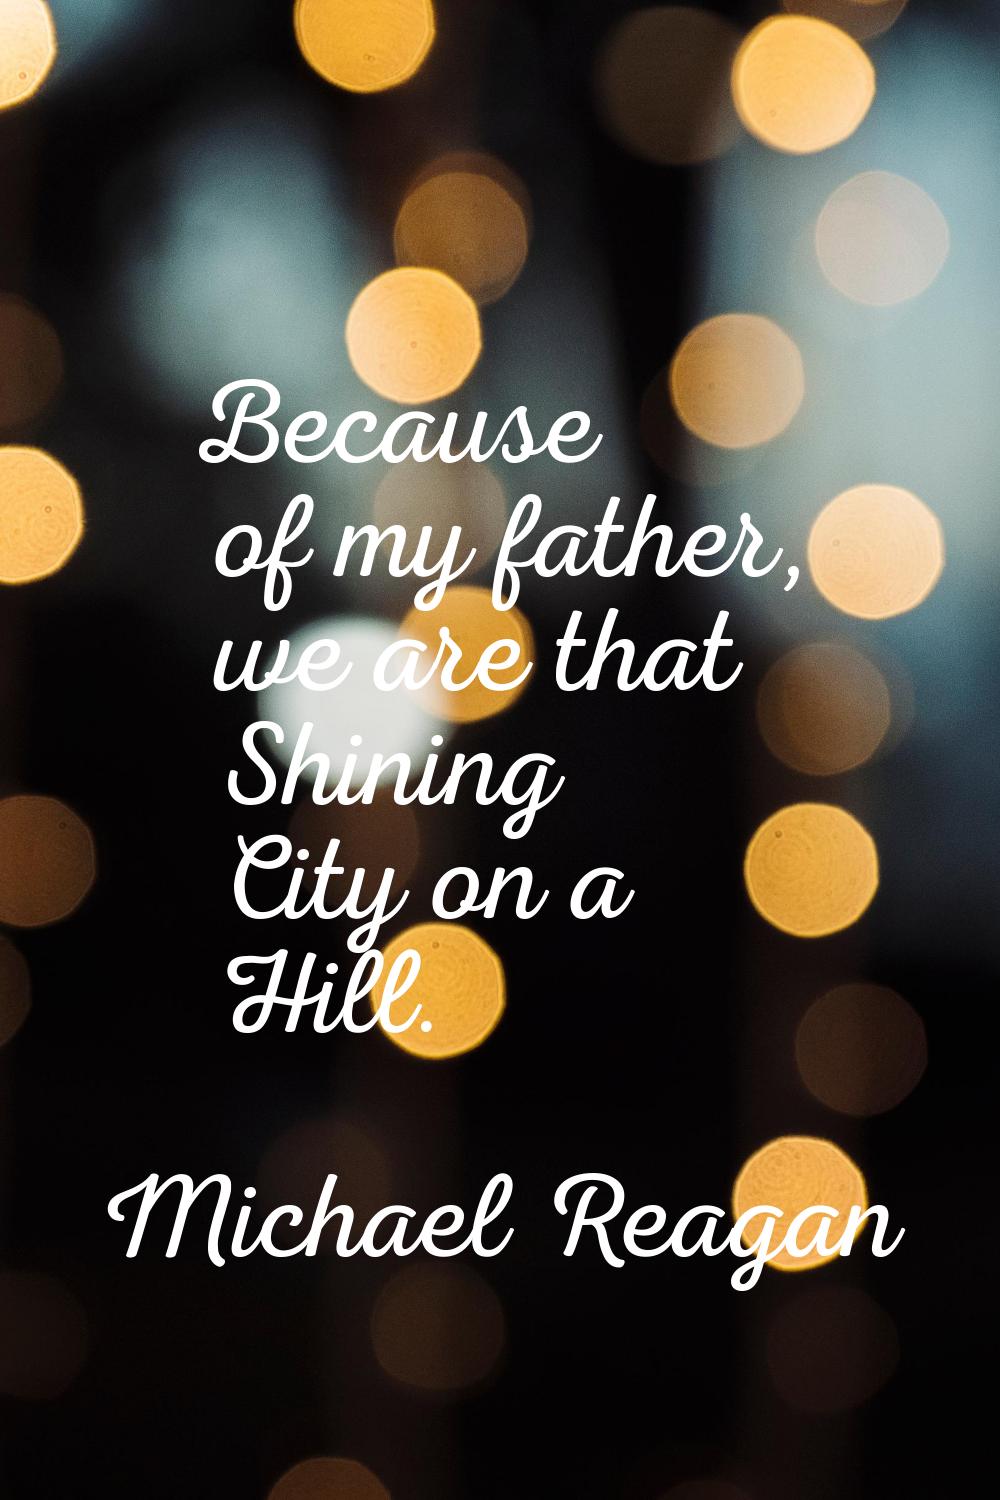 Because of my father, we are that Shining City on a Hill.